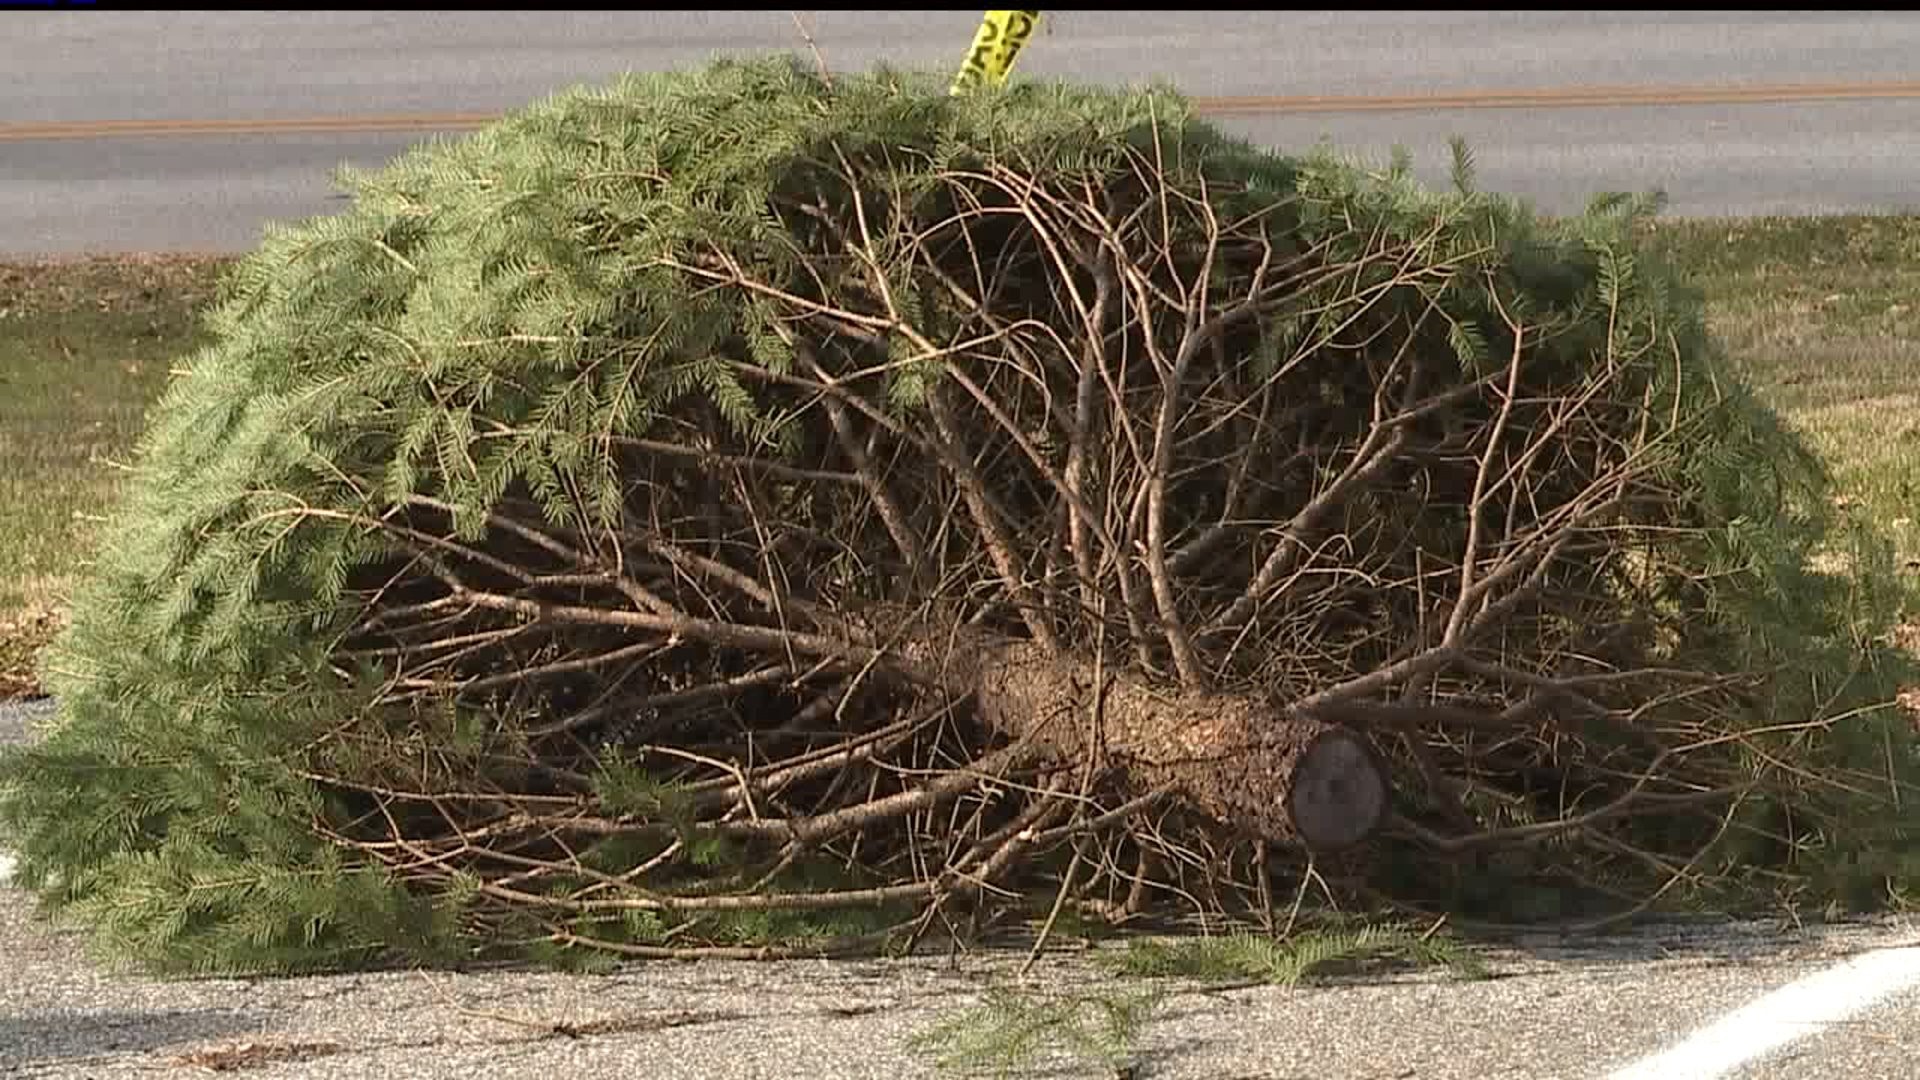 Drop off your Christmas Tree & turn it into free mulch